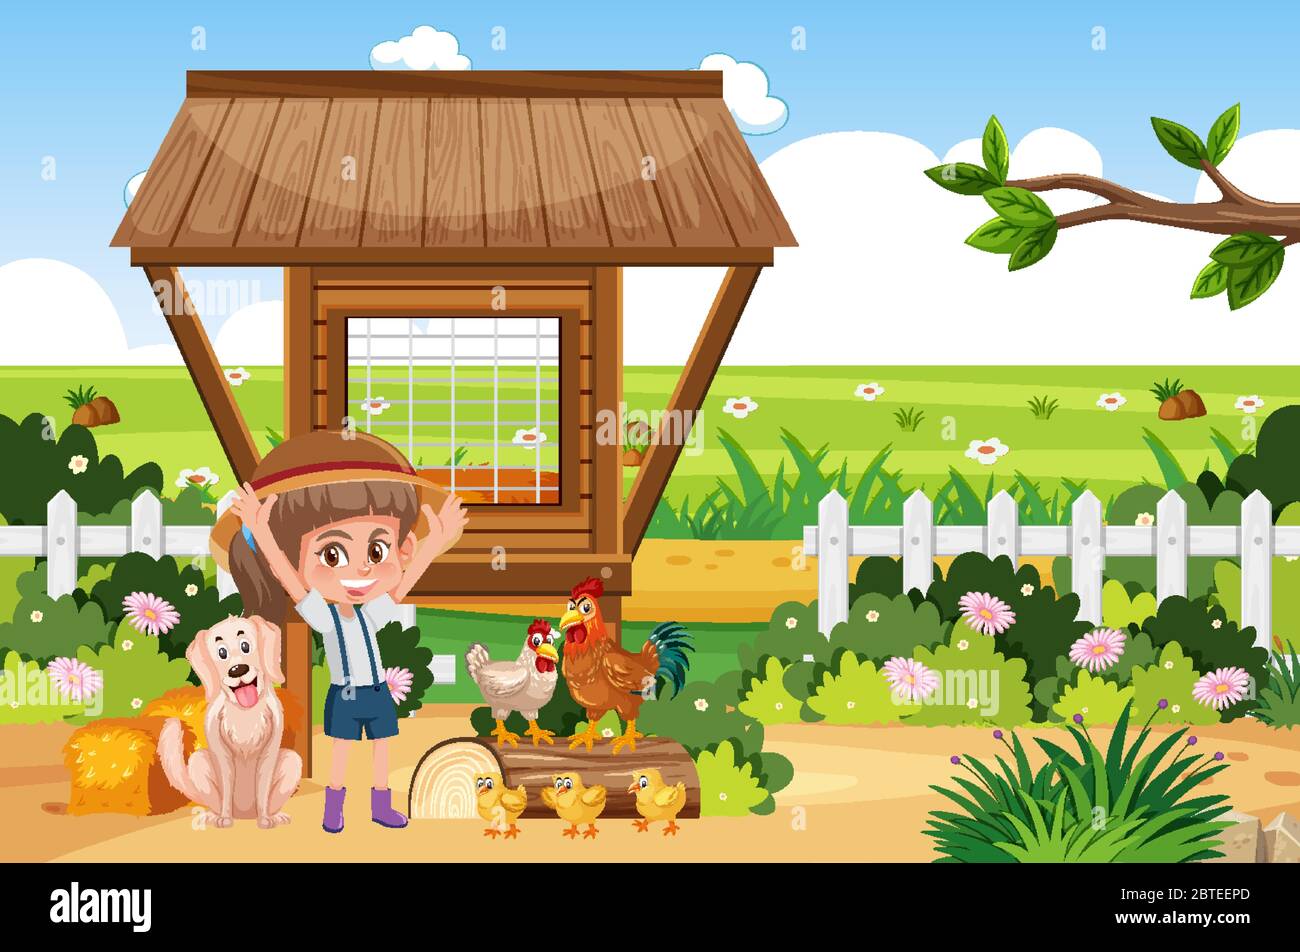 Farm scene with girl and many animals  illustration Stock Vector